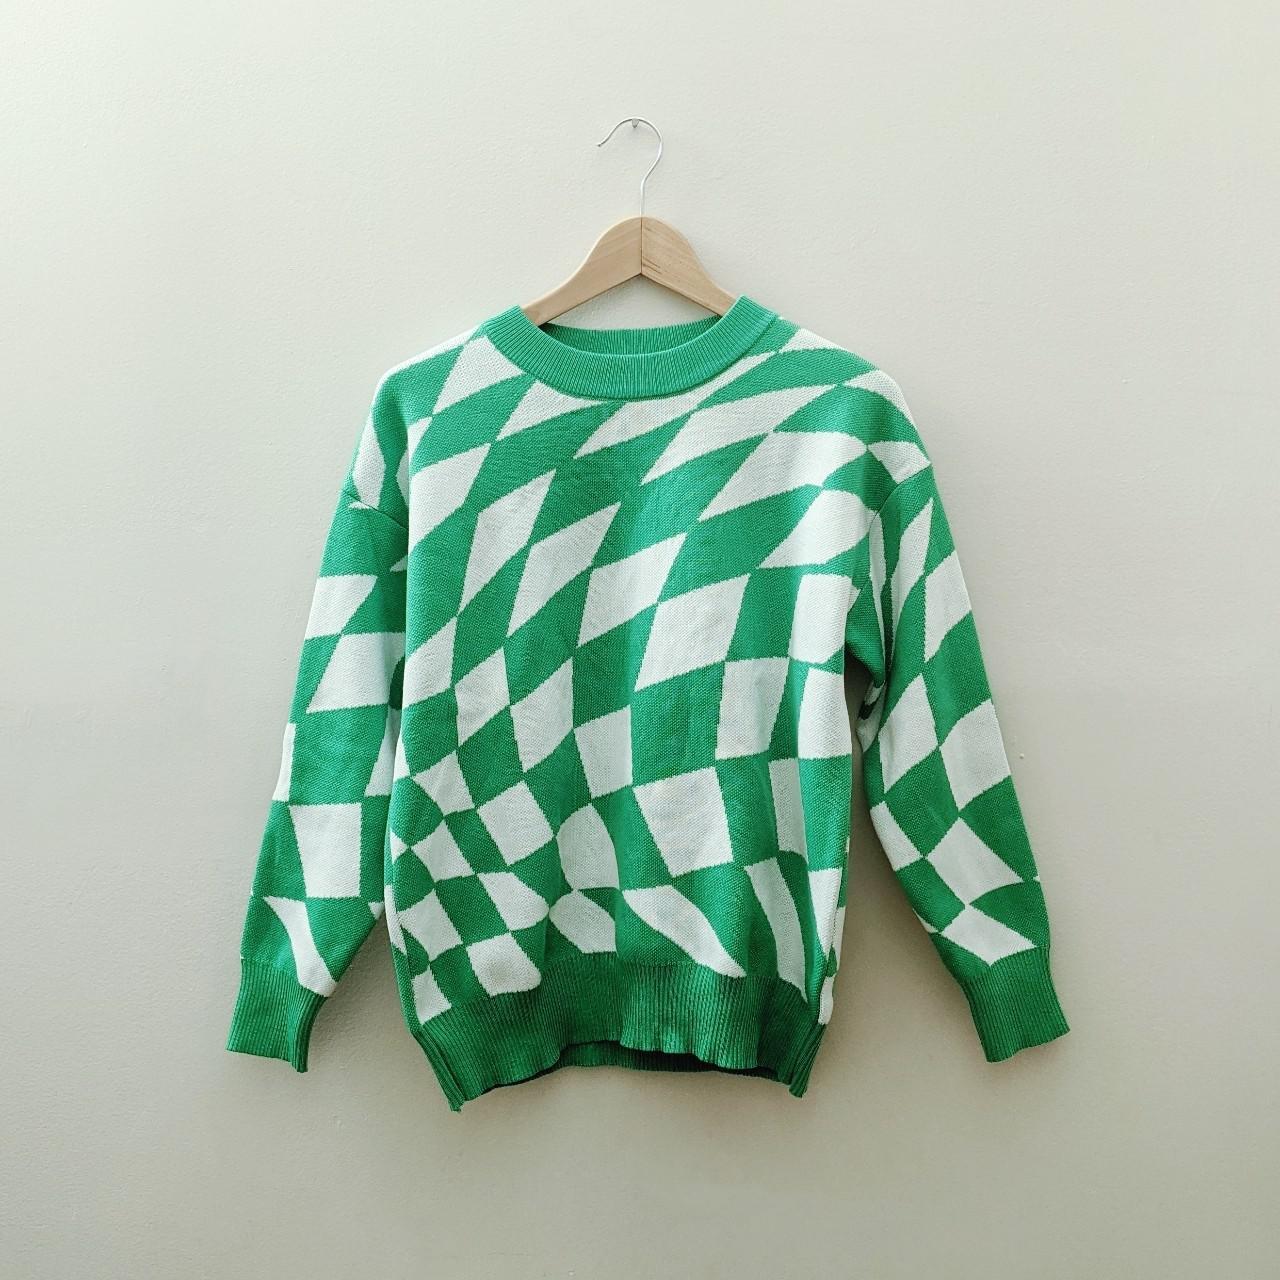 Product Image 1 - ✅✅ Warped checker print pullover